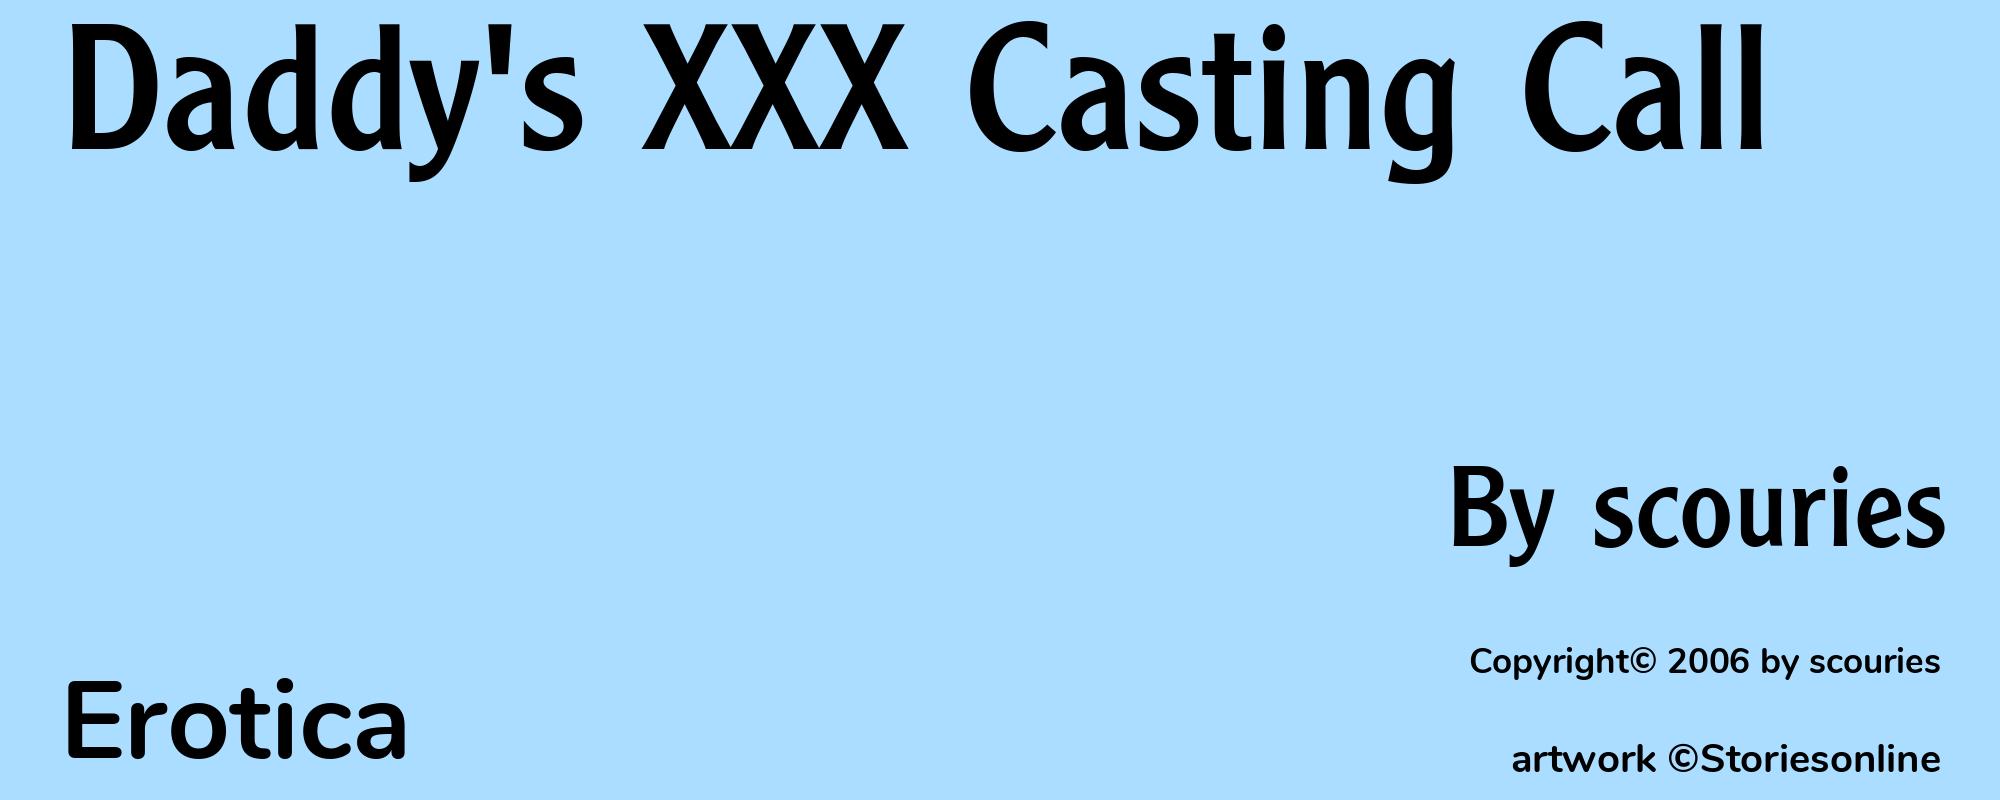 Daddy's XXX Casting Call - Cover